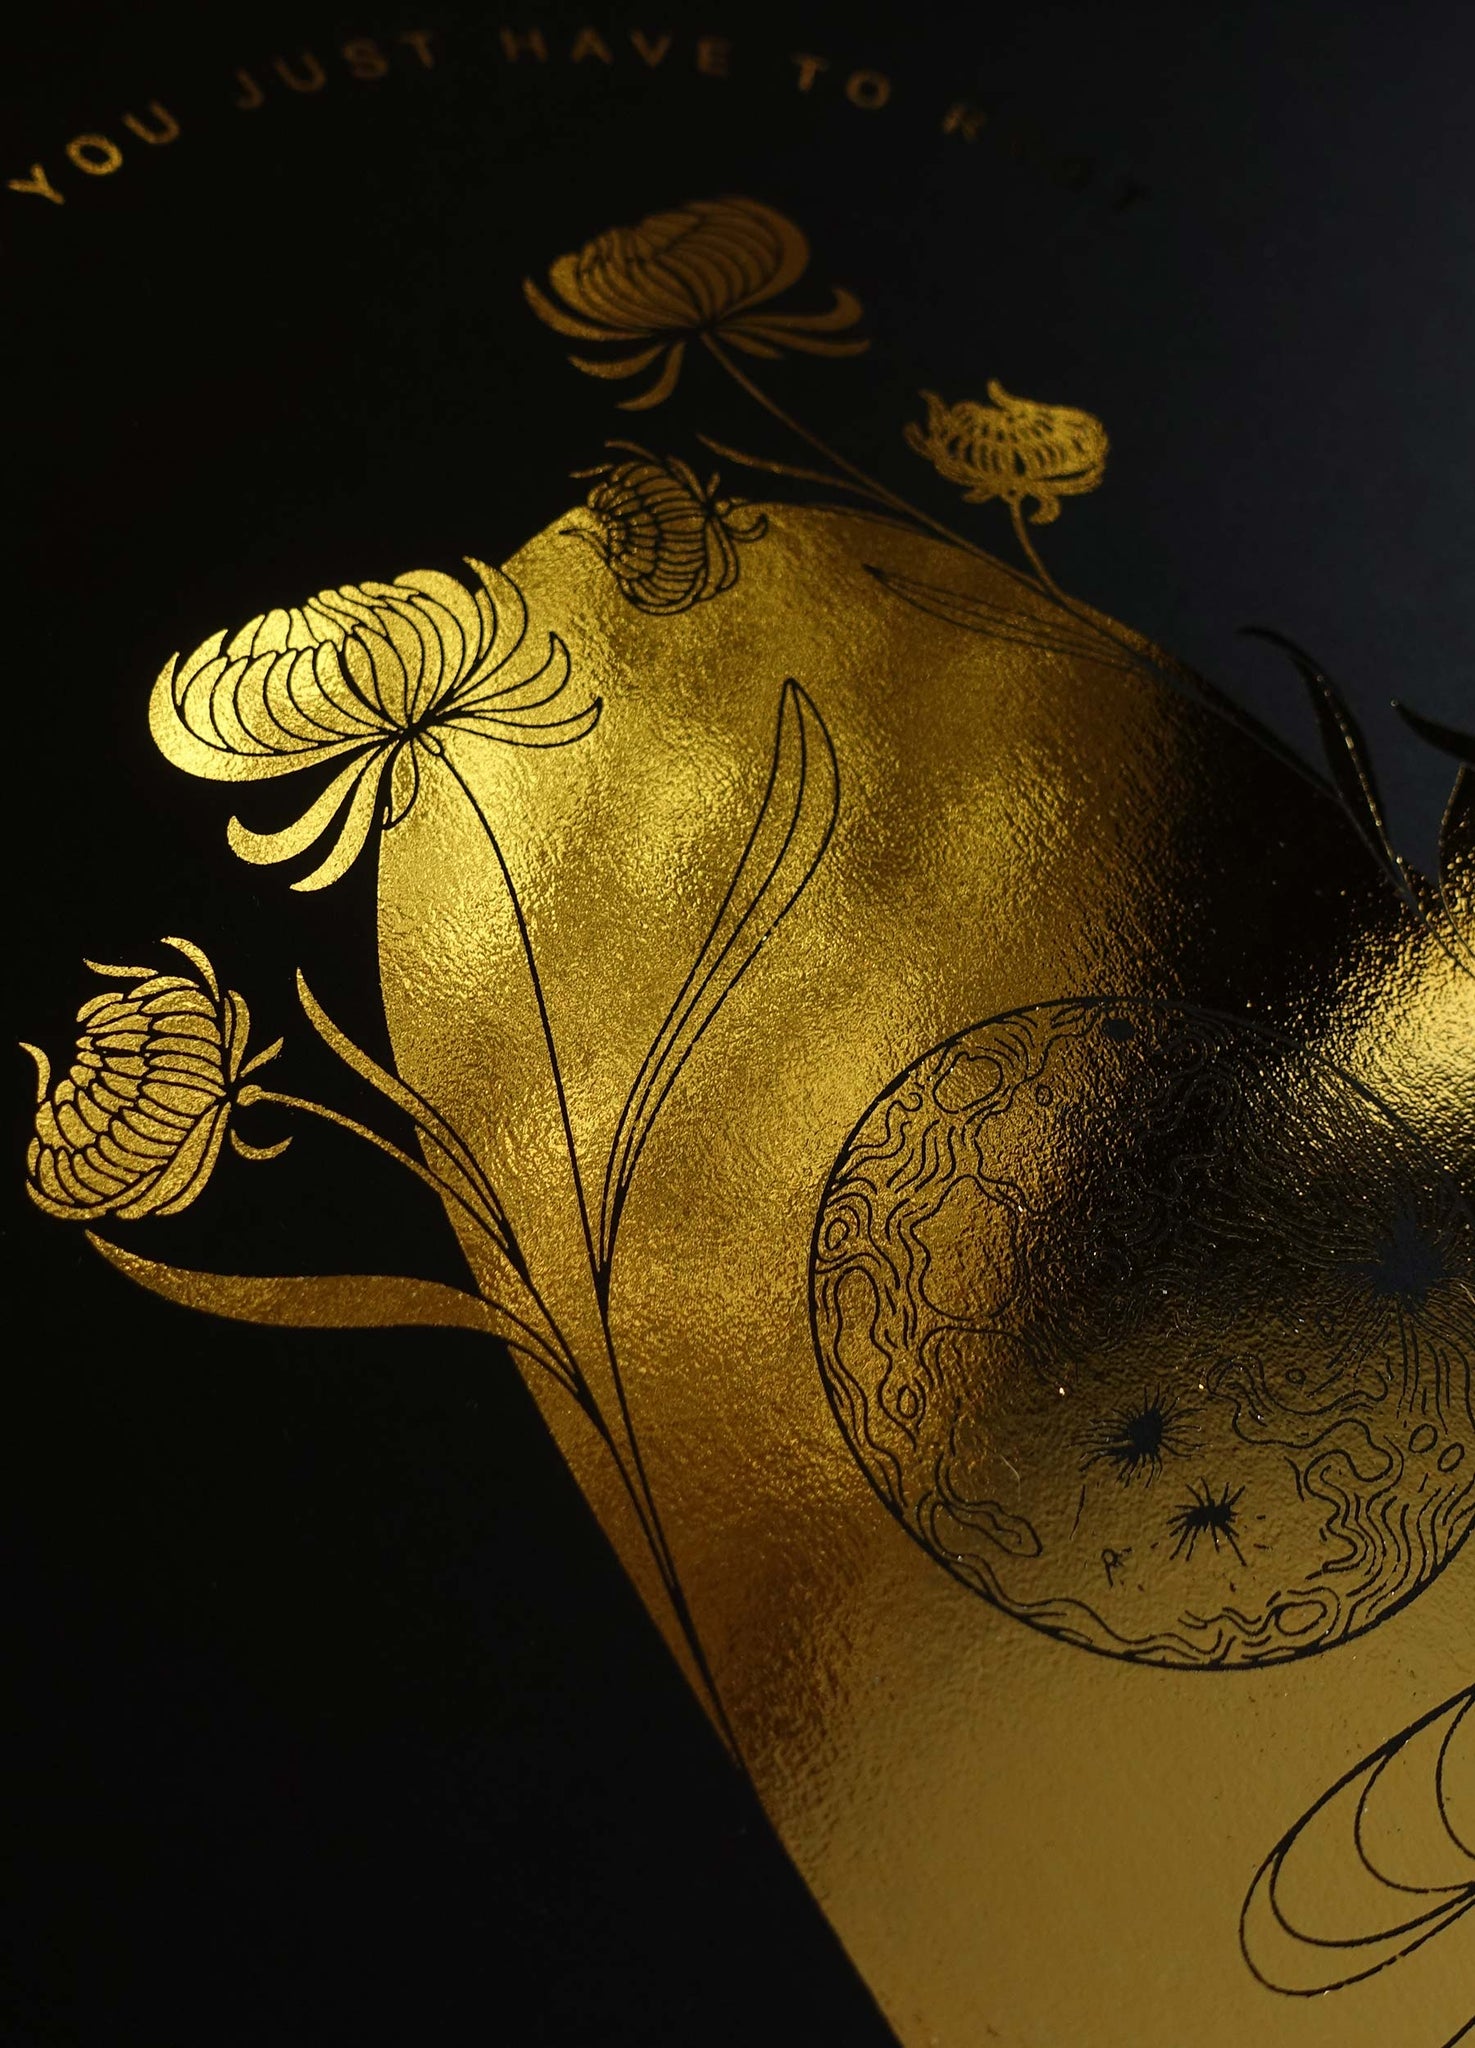 Rest on a Moon boat gold foil on black paper art print by Cocorrina & Co